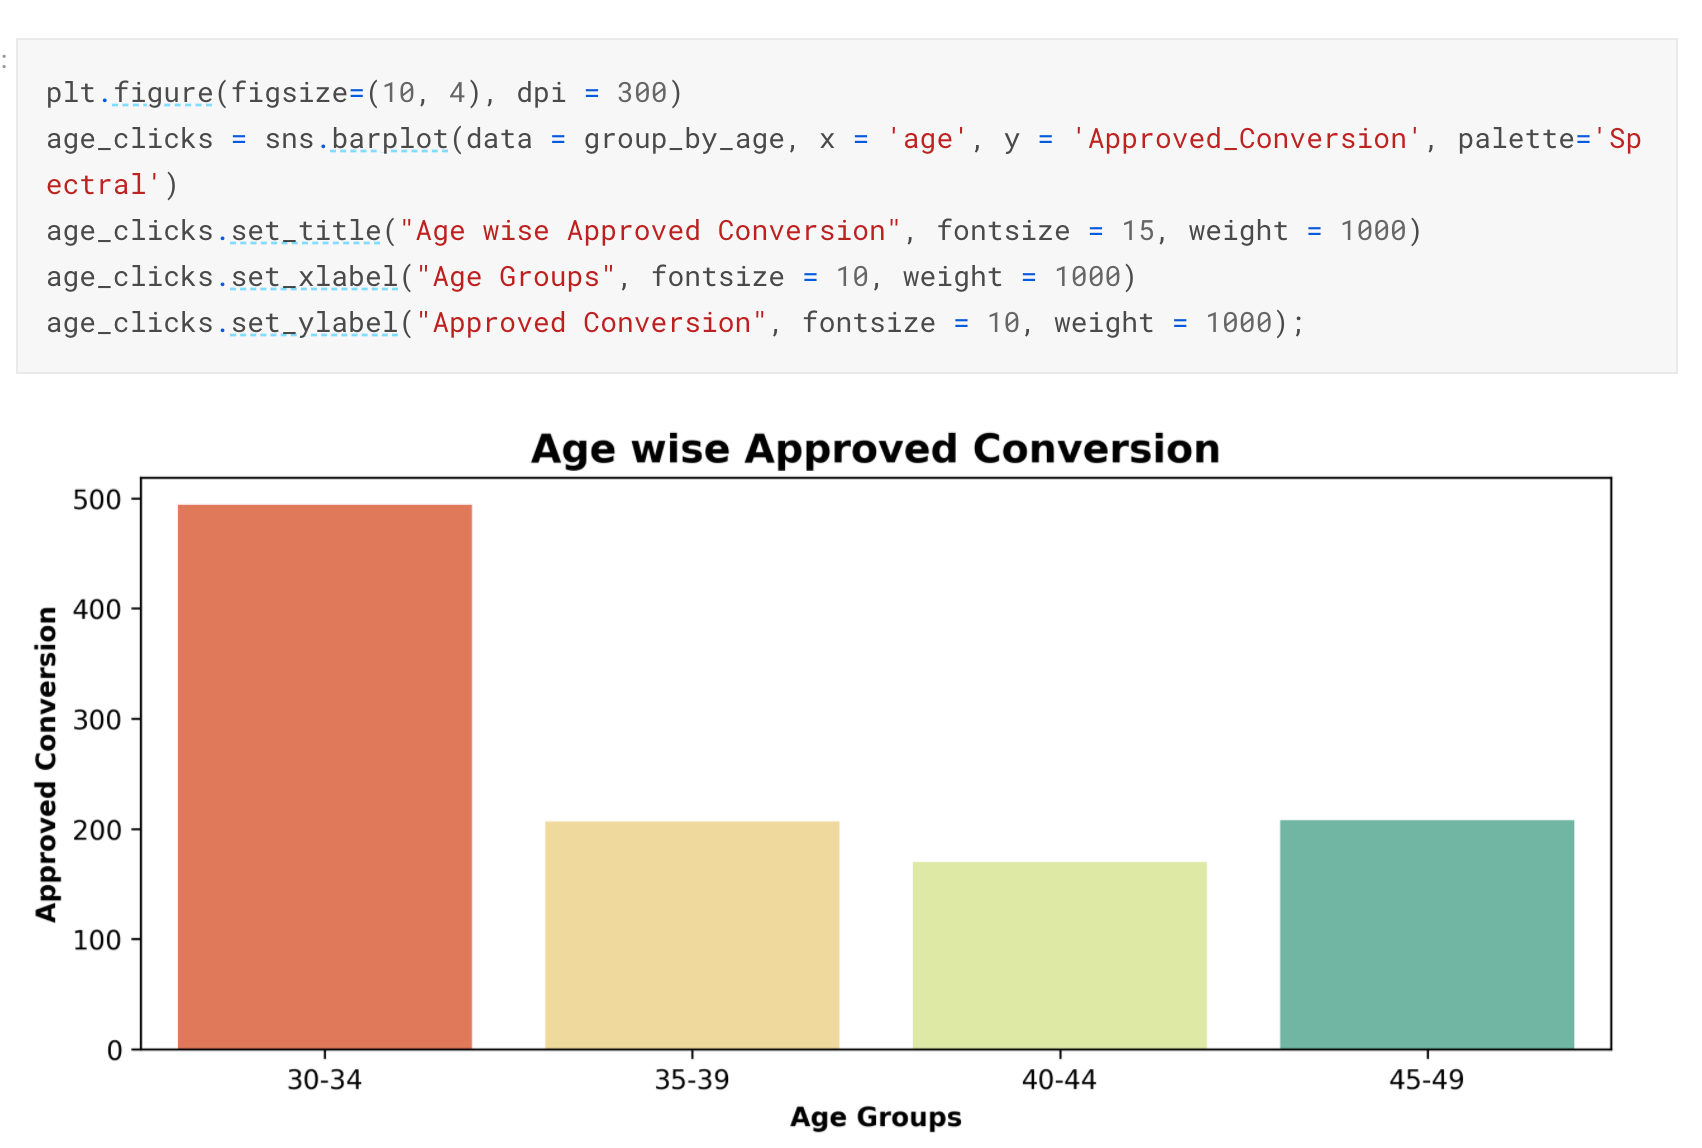 Facebook's age wise approved conversions.